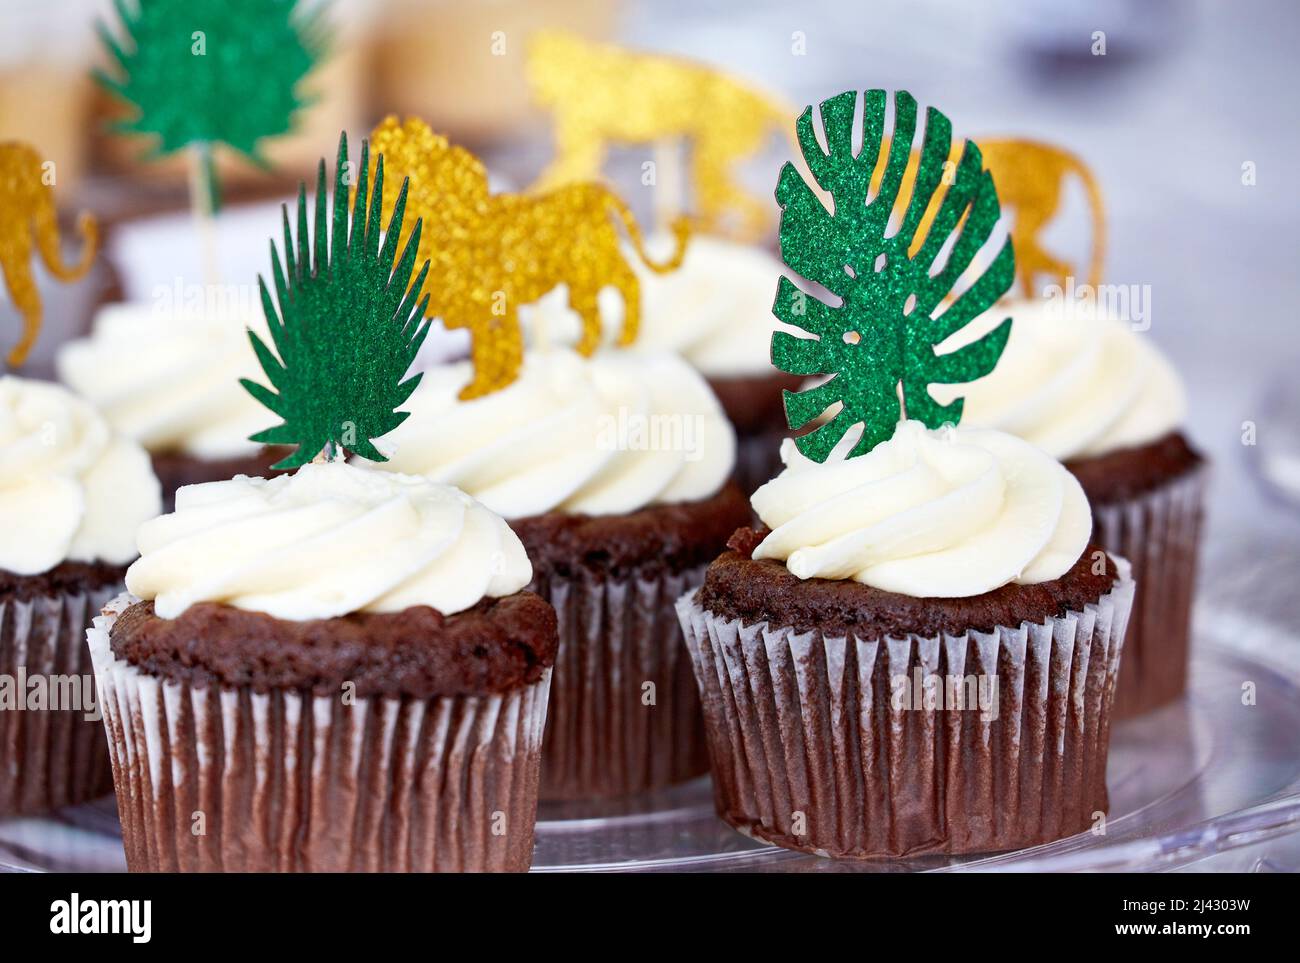 Chocolate Cupcakes with Vanilla Frosting with shallow depth of field Stock Photo